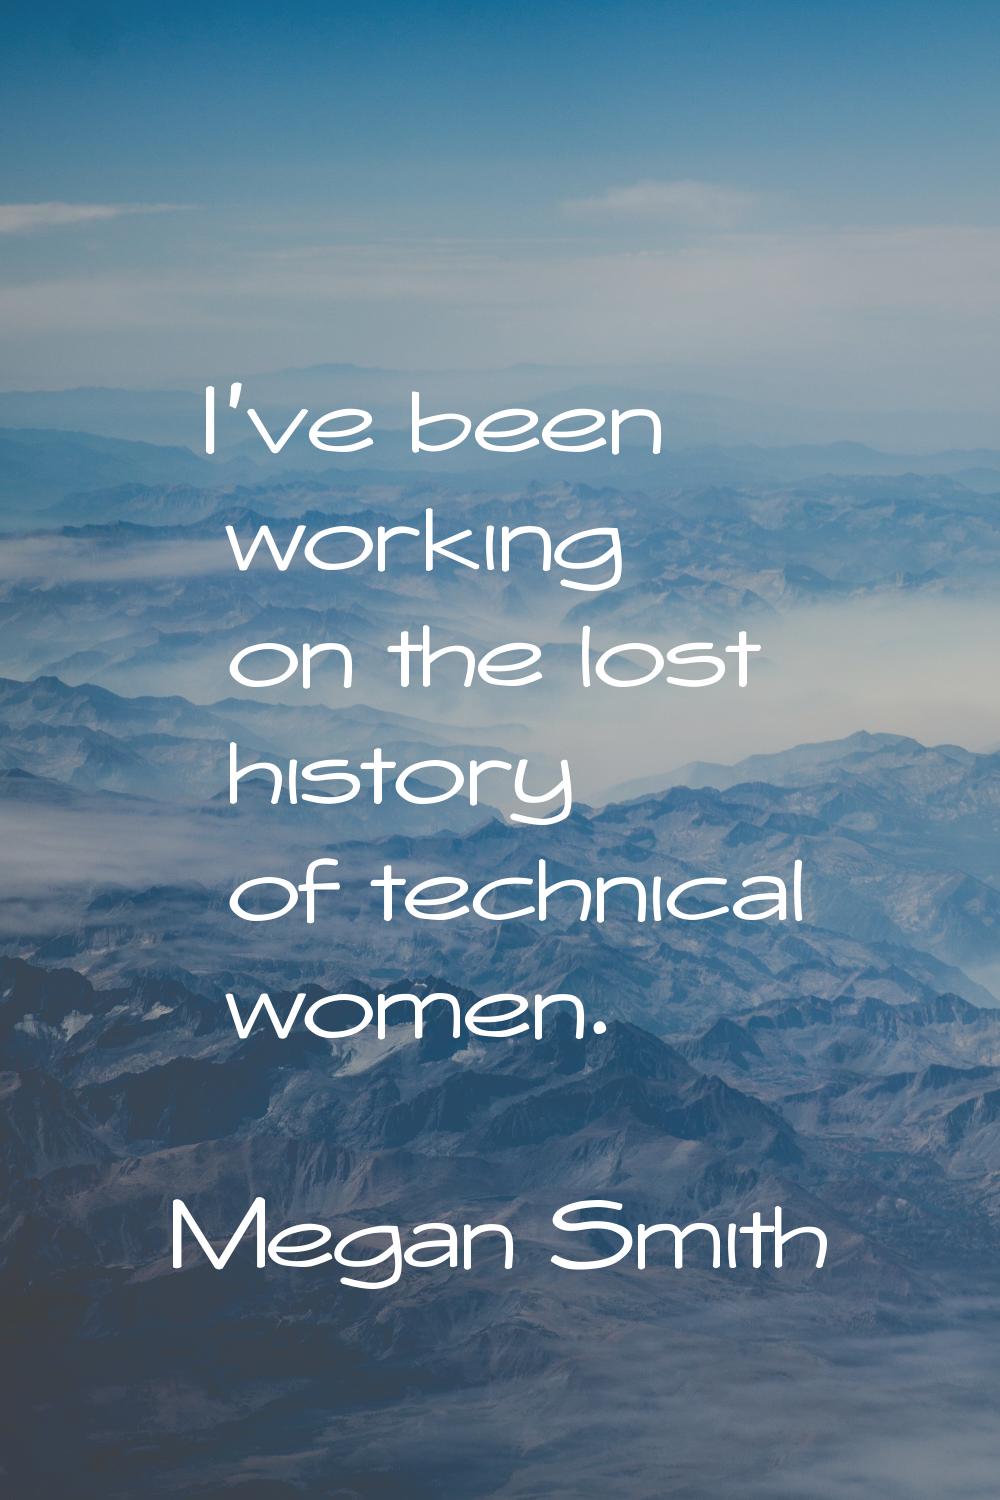 I've been working on the lost history of technical women.